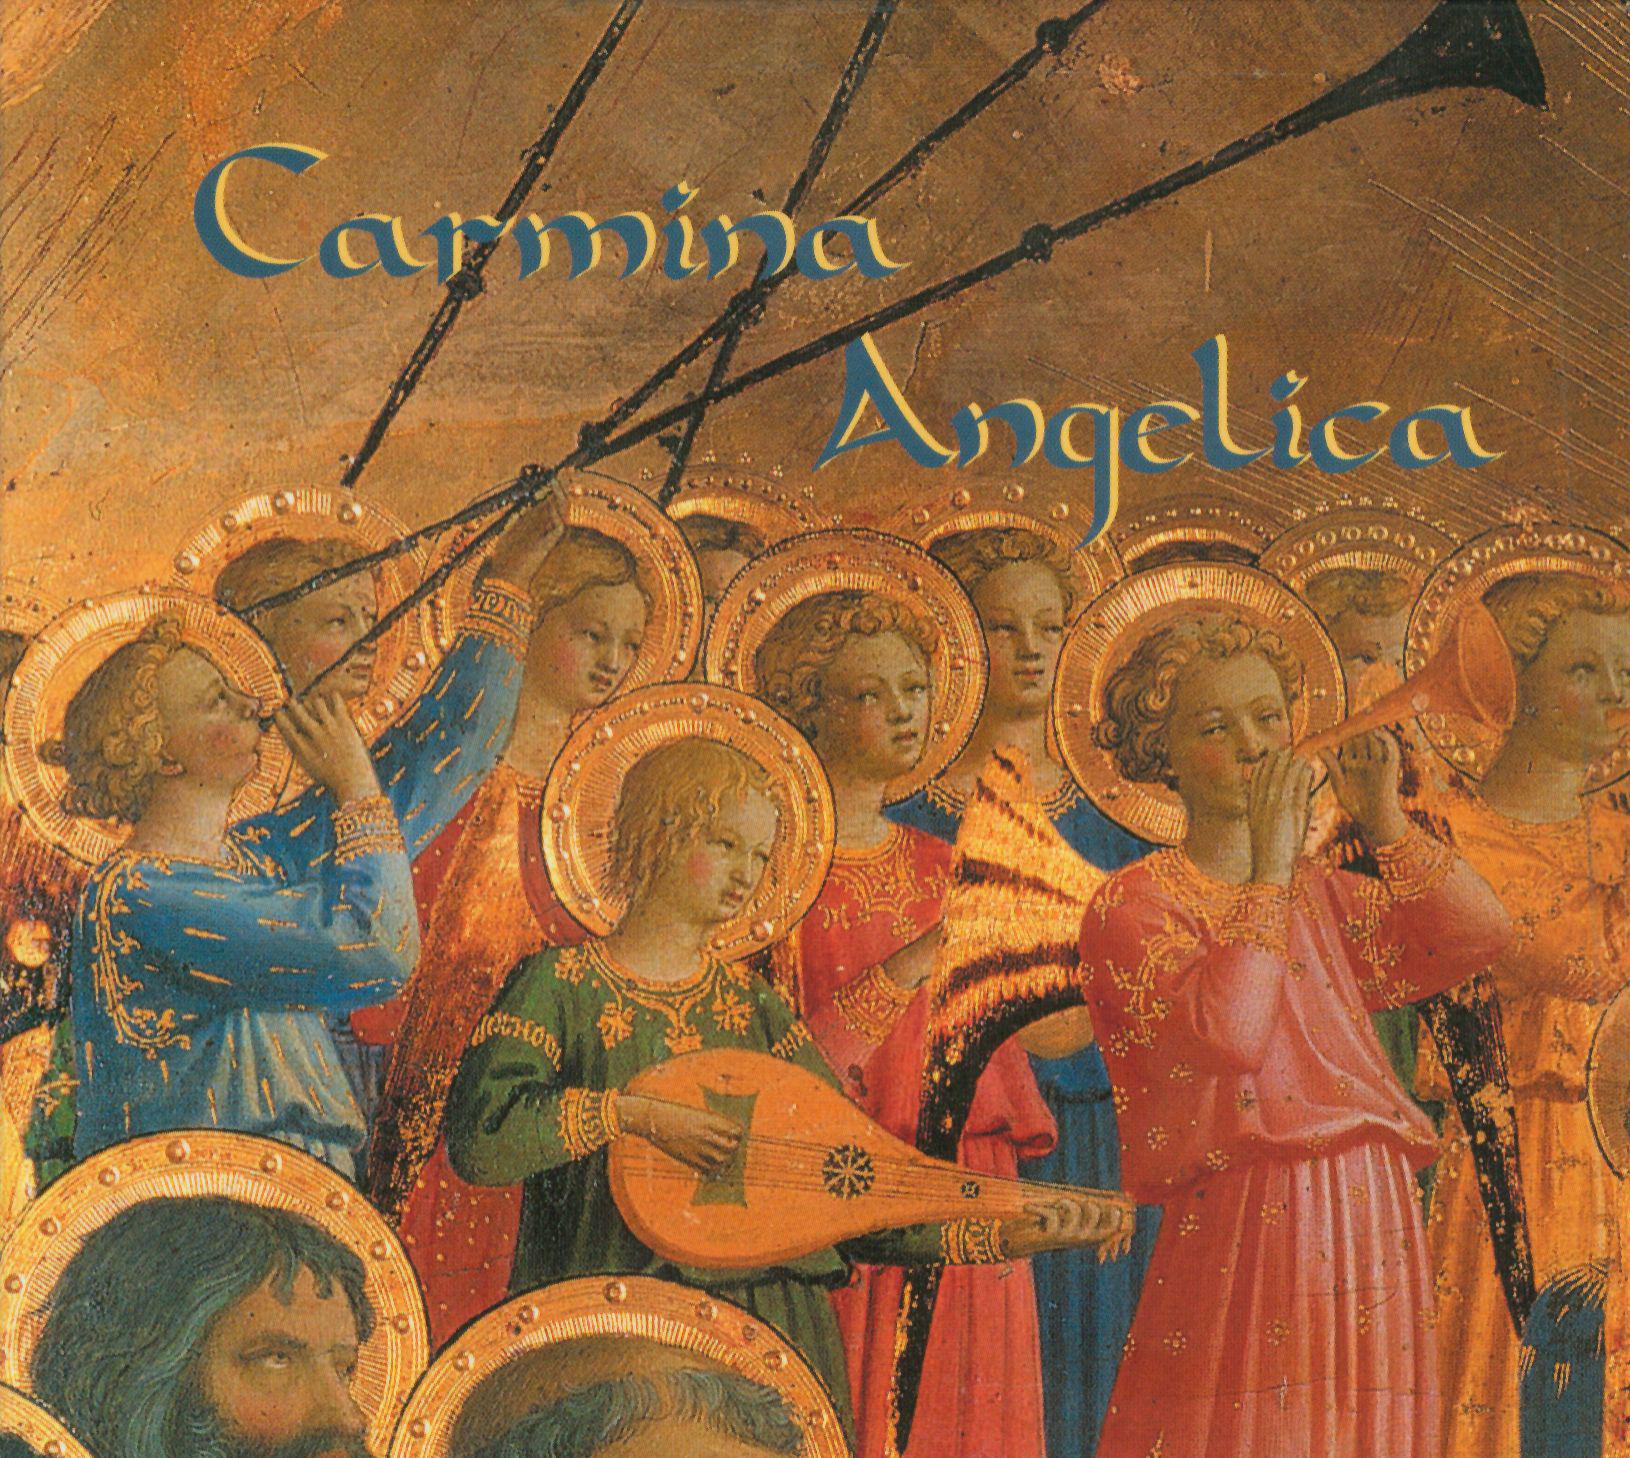 A Ceremony of Carols:Interlude for Harp: A Rustling of the Angels' Wings in the Sky of Bethlehem